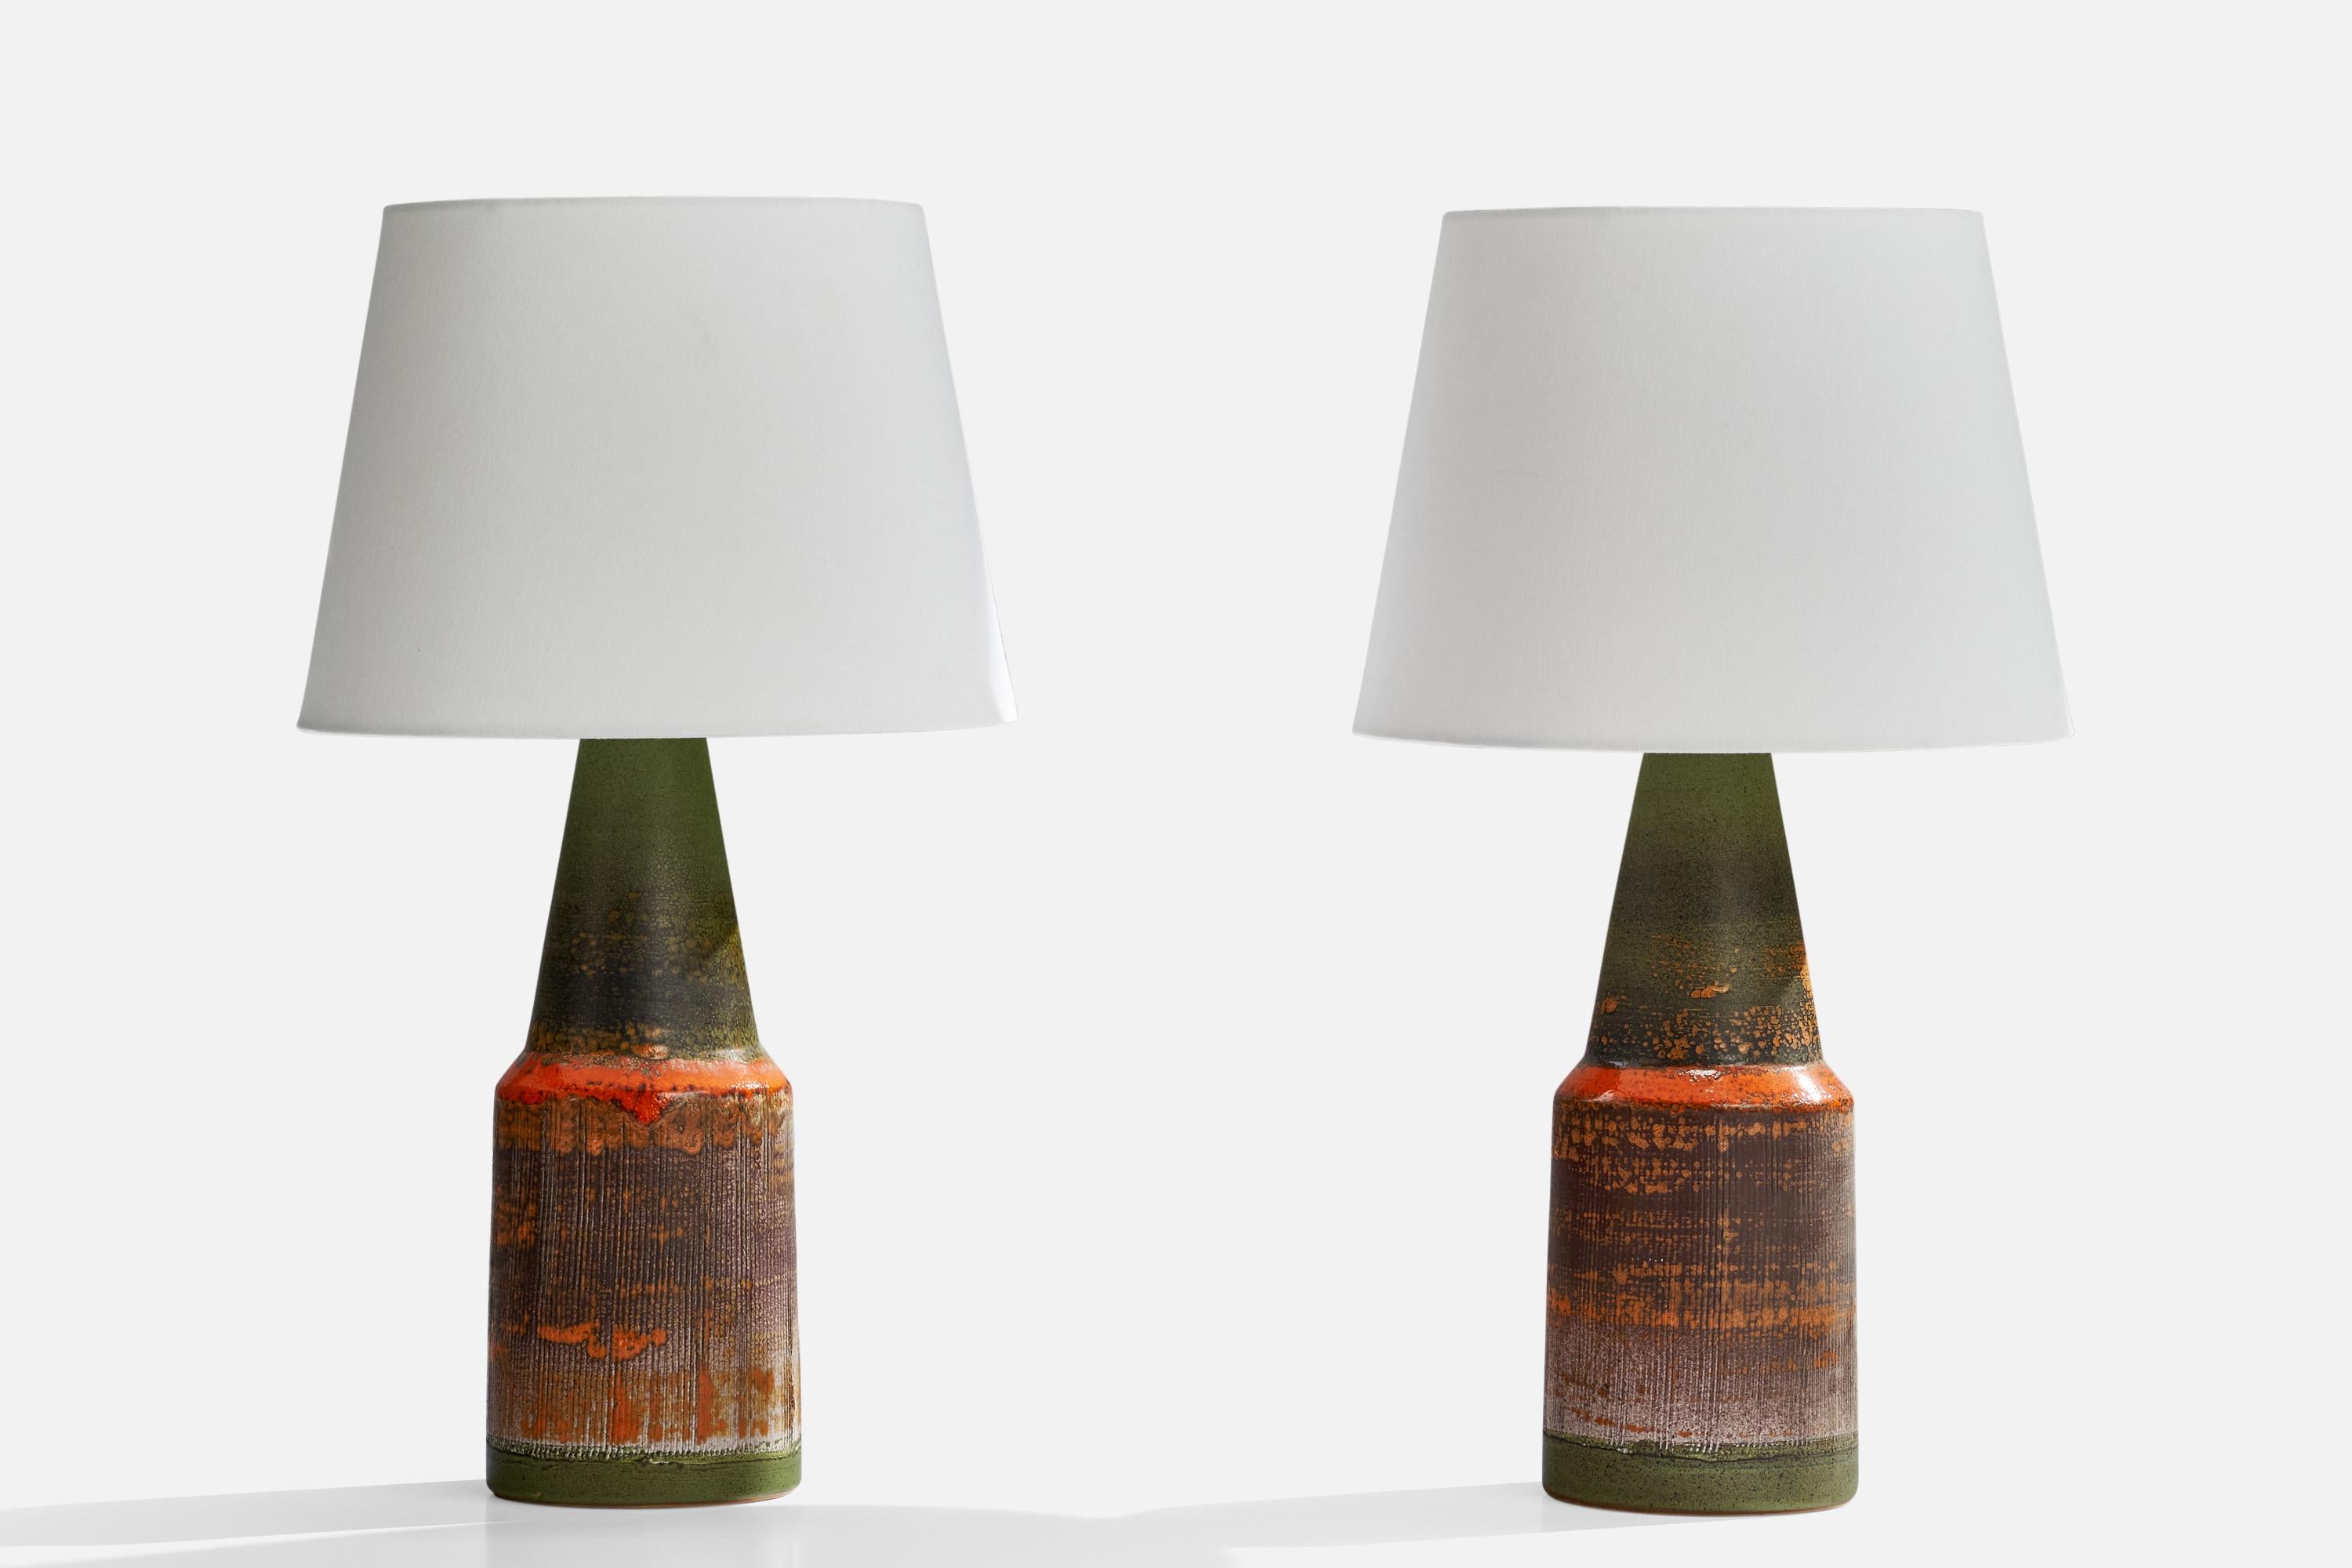 A pair of green and orange-glazed ceramic table lamps designed and produced by Tilgmans Keramik, Sweden, 1960s.

Dimensions of Lamp (inches): 16.5” H x 5”  Diameter
Dimensions of Shade (inches): 9” Top Diameter x 12”  Bottom Diameter x 9”